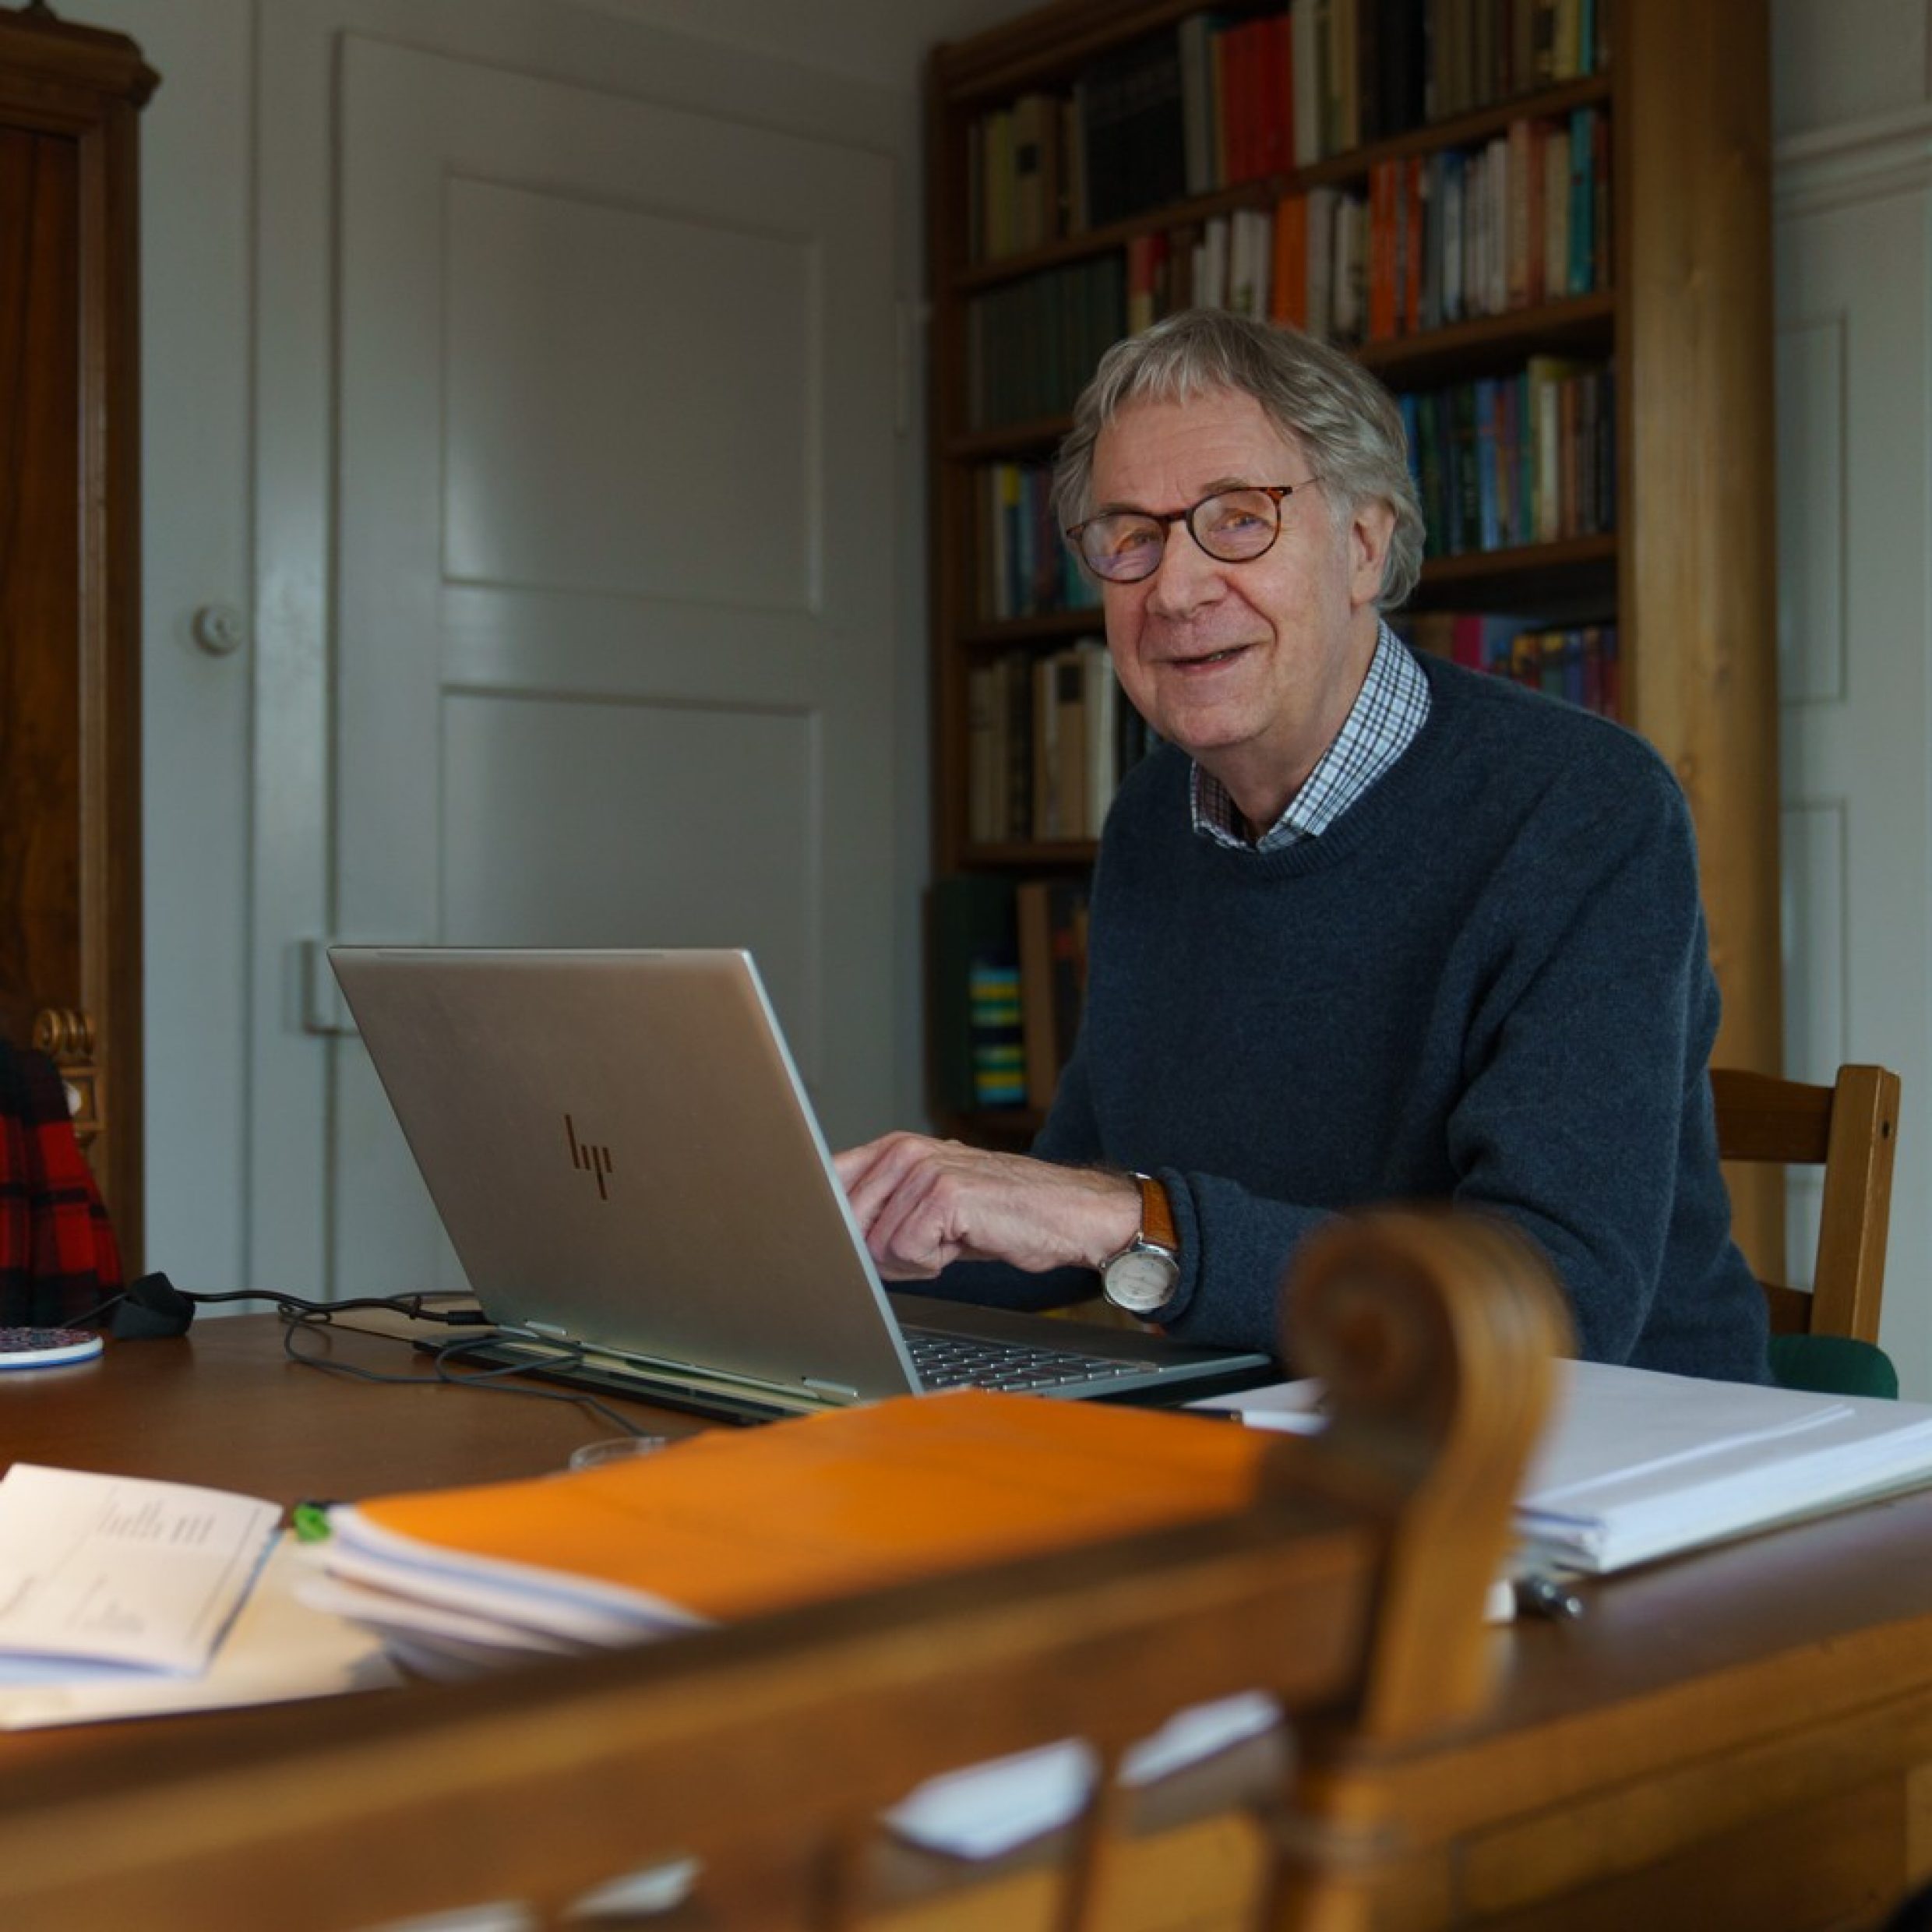 An older man sits at a table in front of a laptop, pointing to something on the screen. He smiles at the camera. The man has grey hair and is wearing glasses and a blue sweater.  